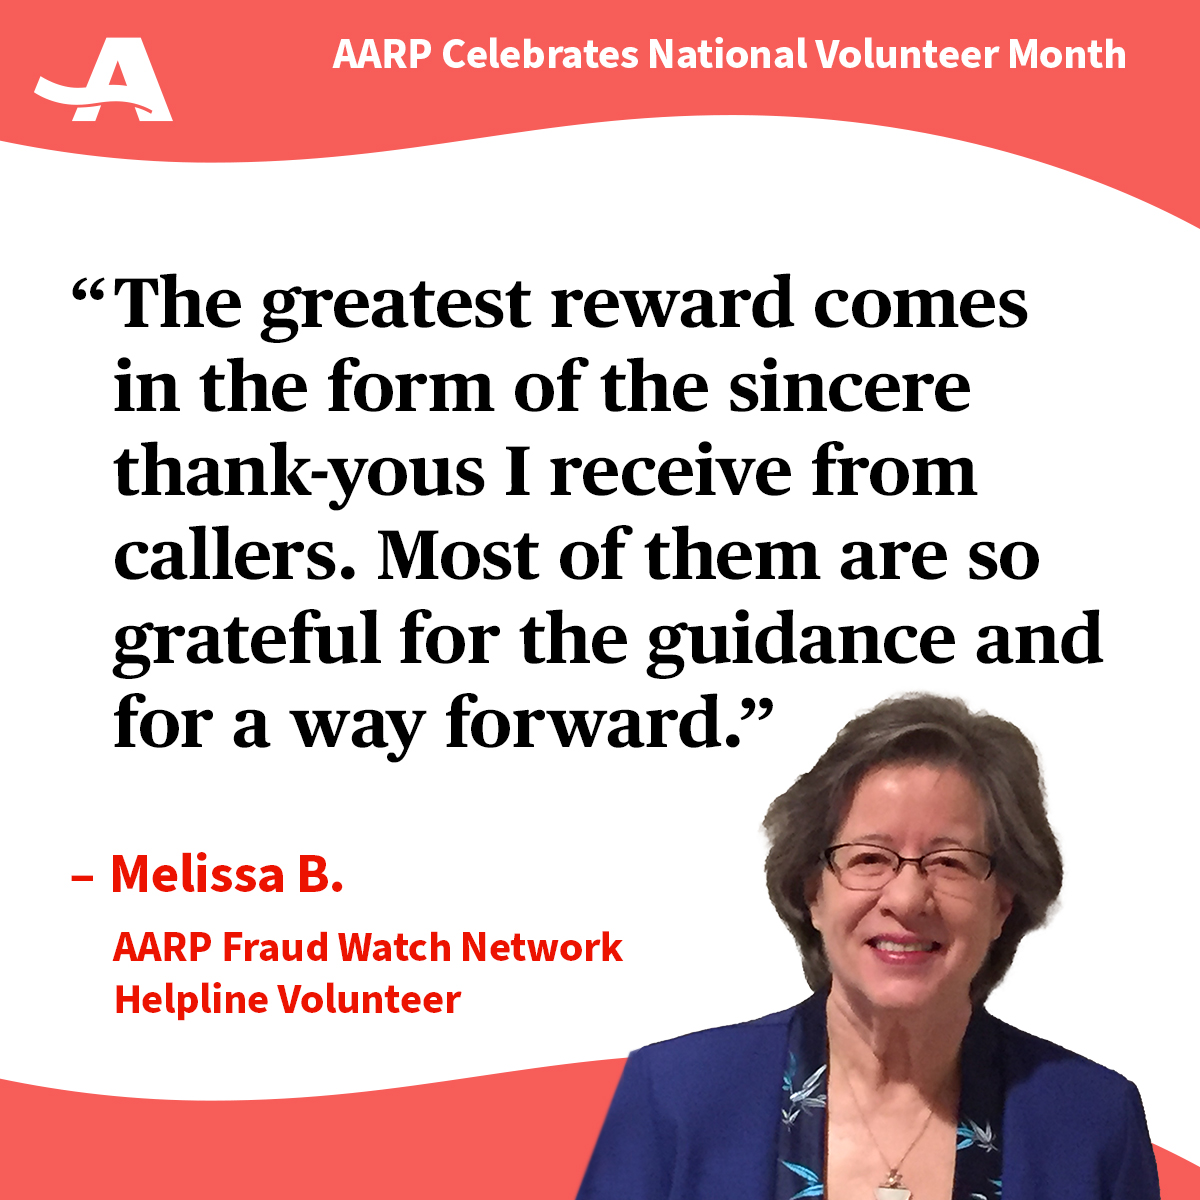 Call AARP Fraud Watch Network Helpline if you or a loved one has been targeted by a scam or fraud. Trained fraud specialists and volunteers field thousands of calls each month. Call 877-908-3360 toll-free, weekdays 8 a.m. to 8 p.m. #MeaningfulMonday #NationalVolunteerMonth